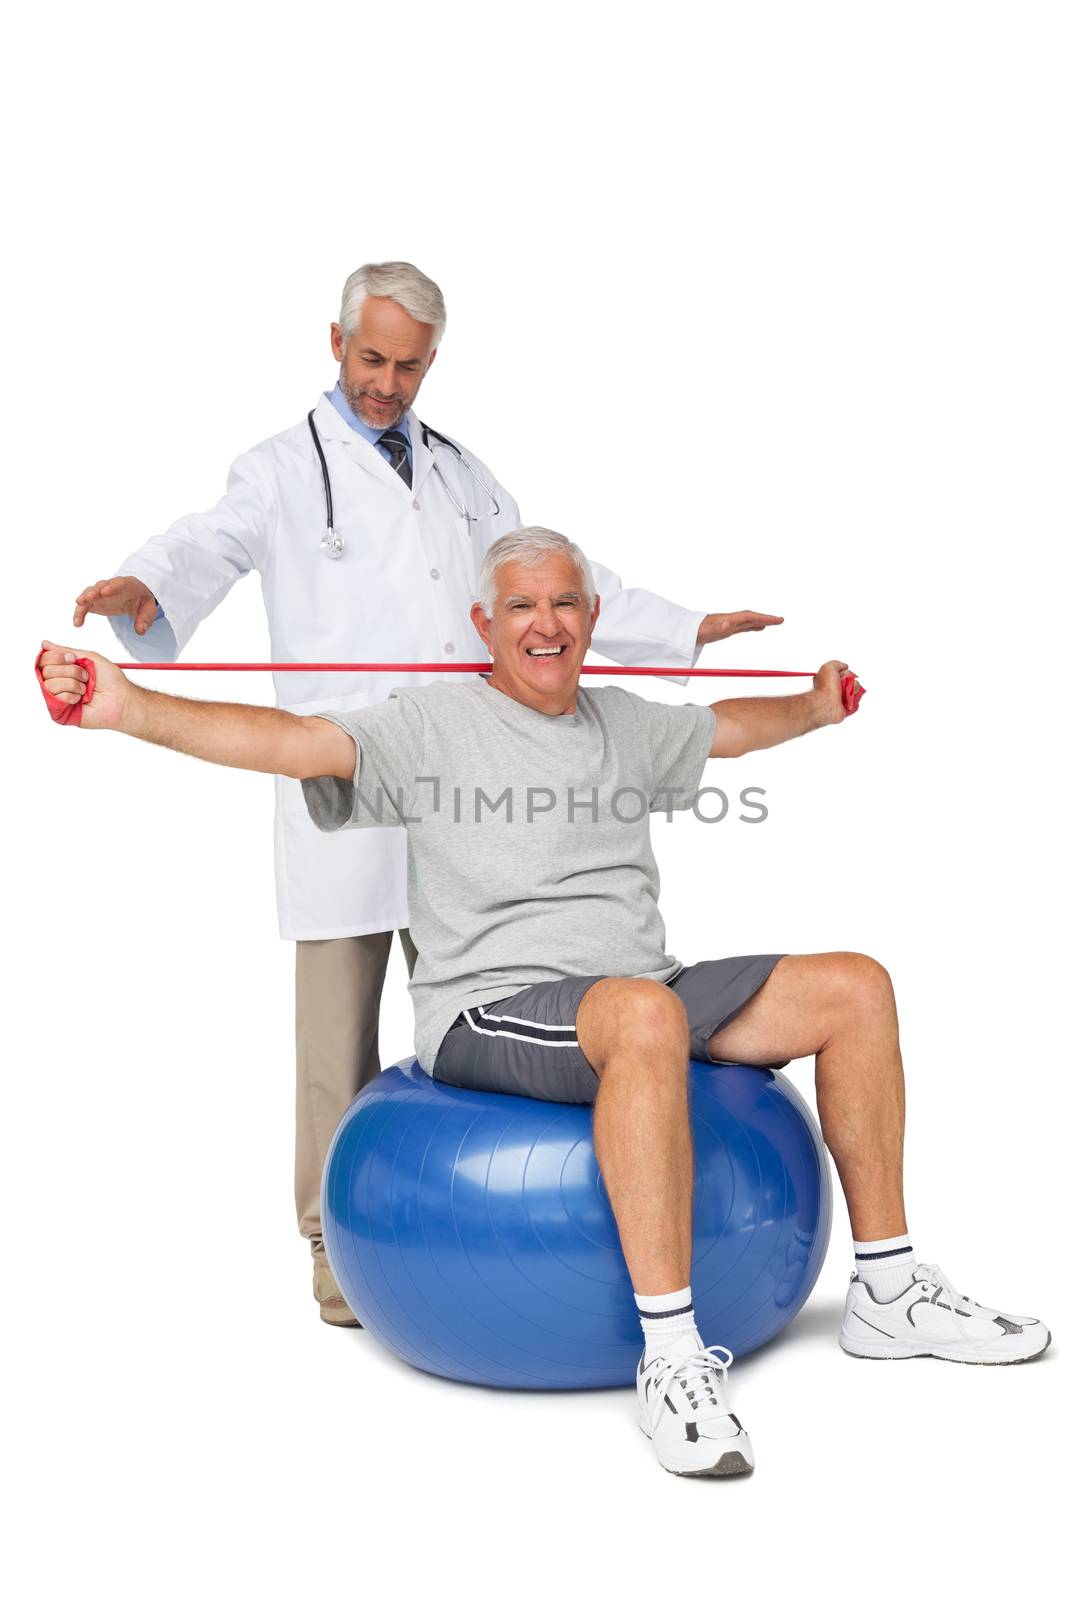 Mhysiotherapist looking at senior man sit on exercise ball with yoga belt by Wavebreakmedia